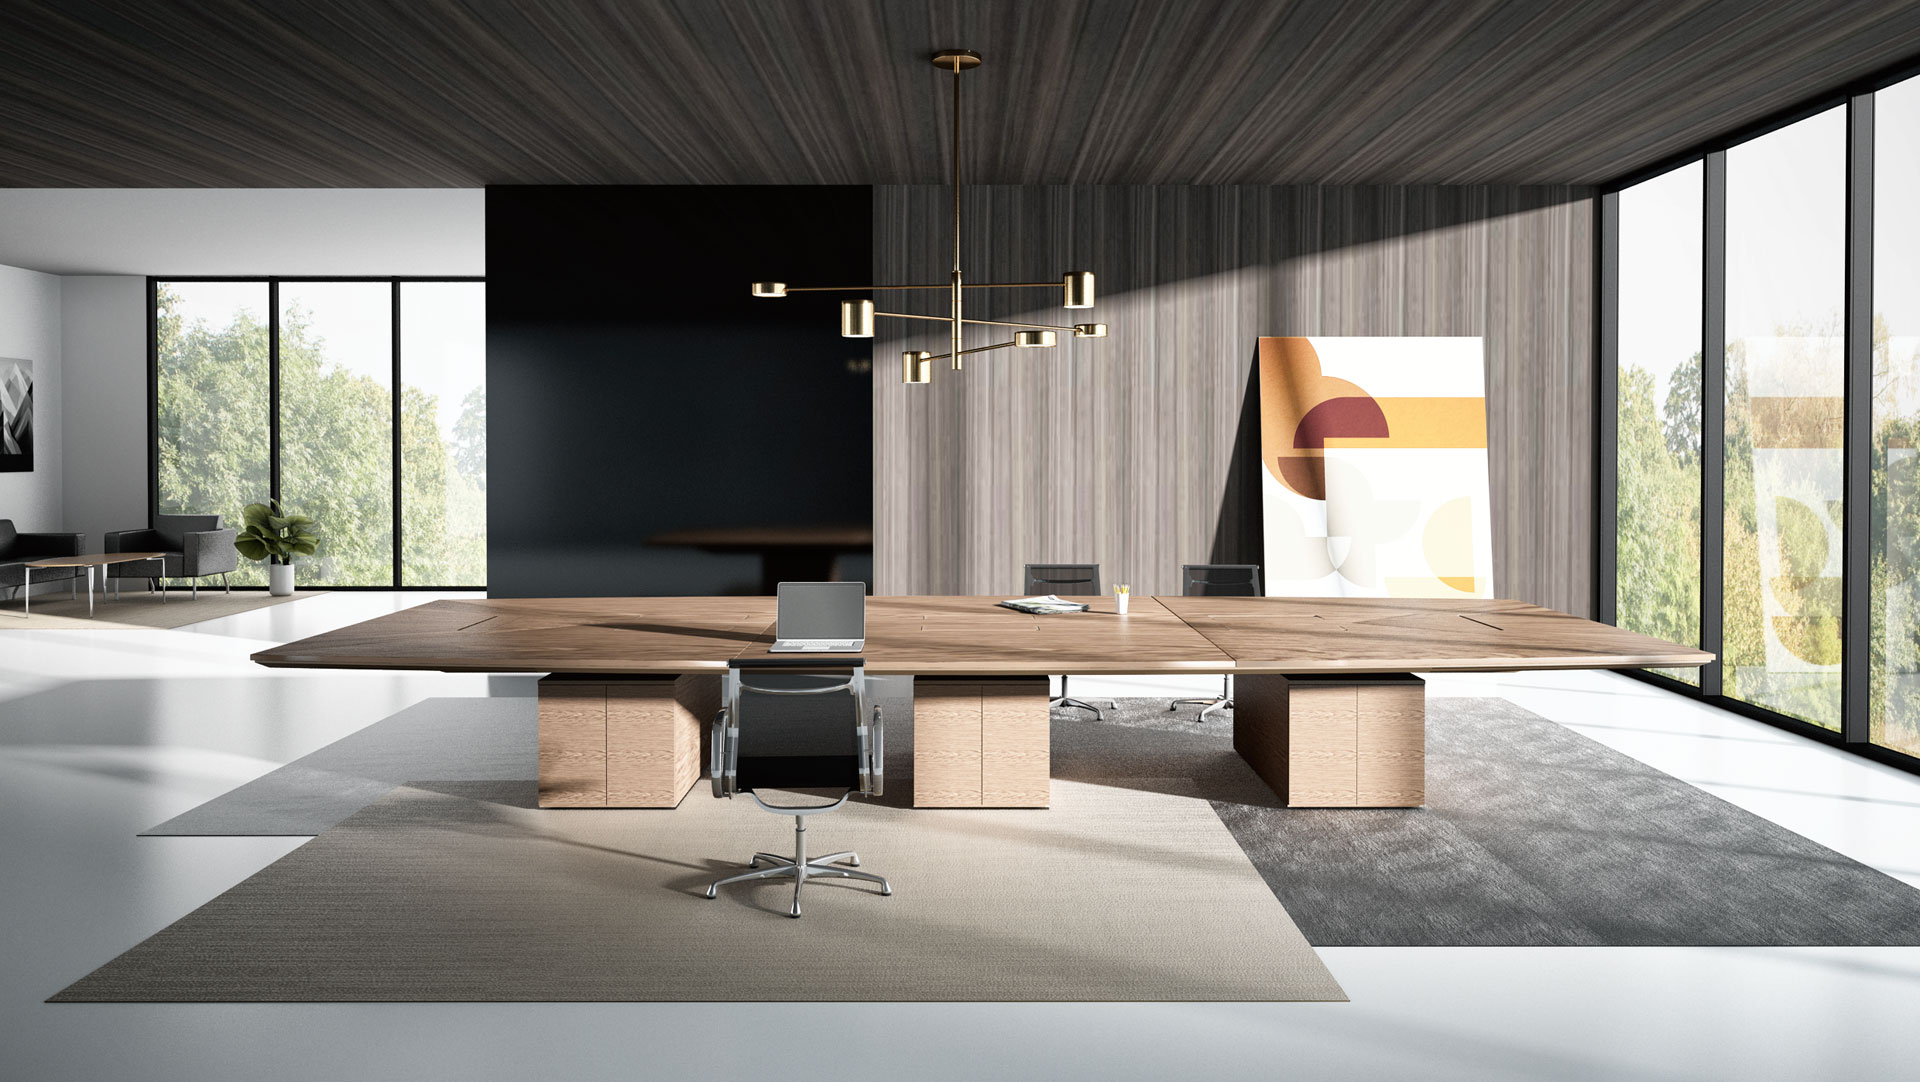 sunburst conference table in an open space interior layout